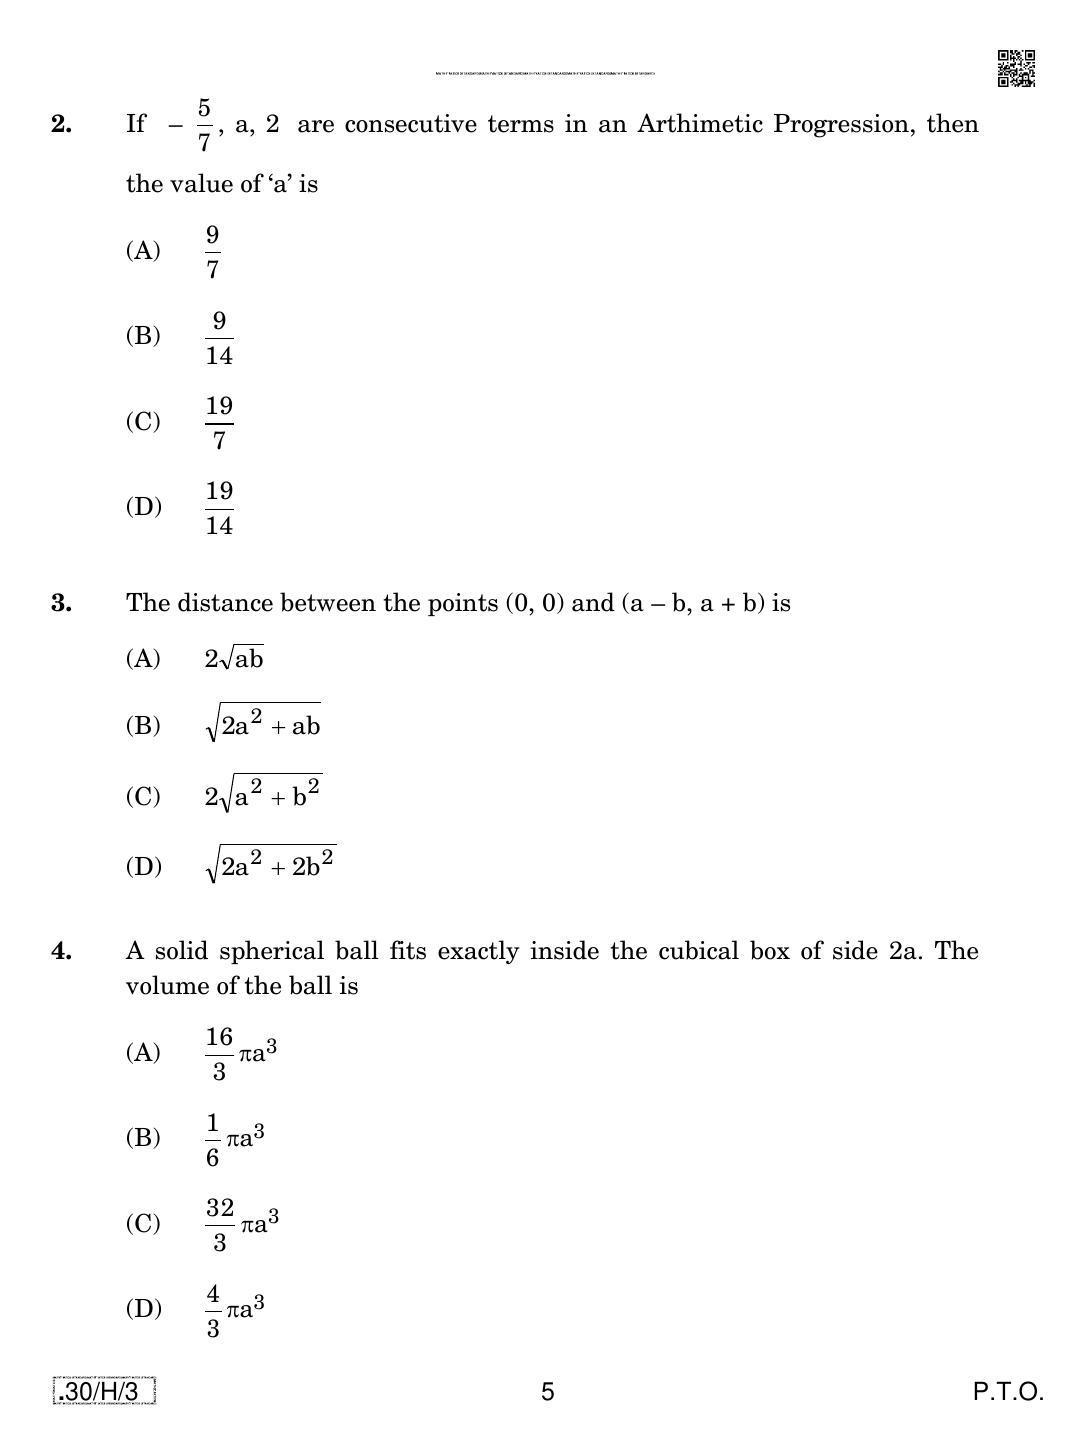 CBSE Class 10 30-C-3 - Maths (Standard) 2020 Compartment Question Paper - Page 5